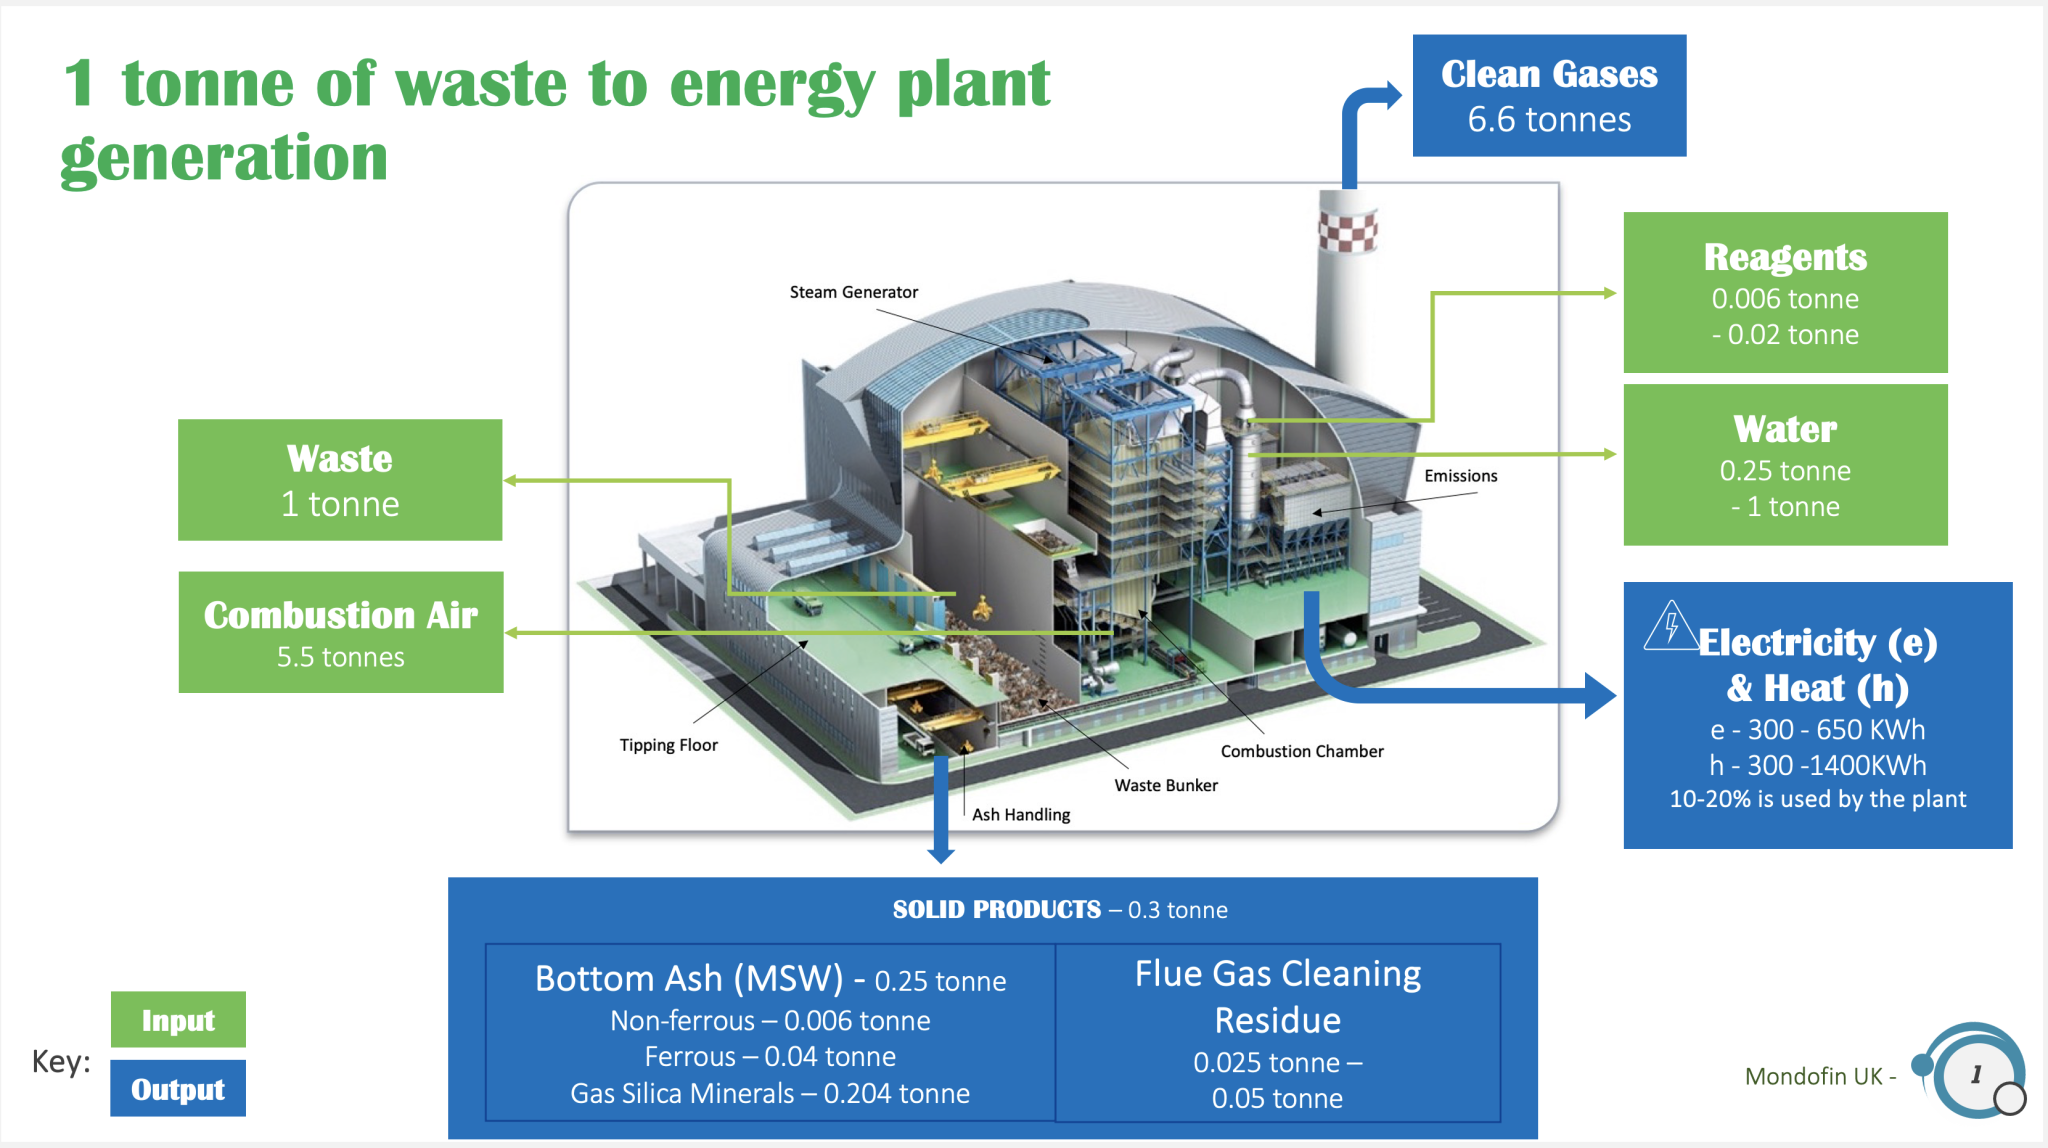 1 tonne of Waste to Energy plant generation